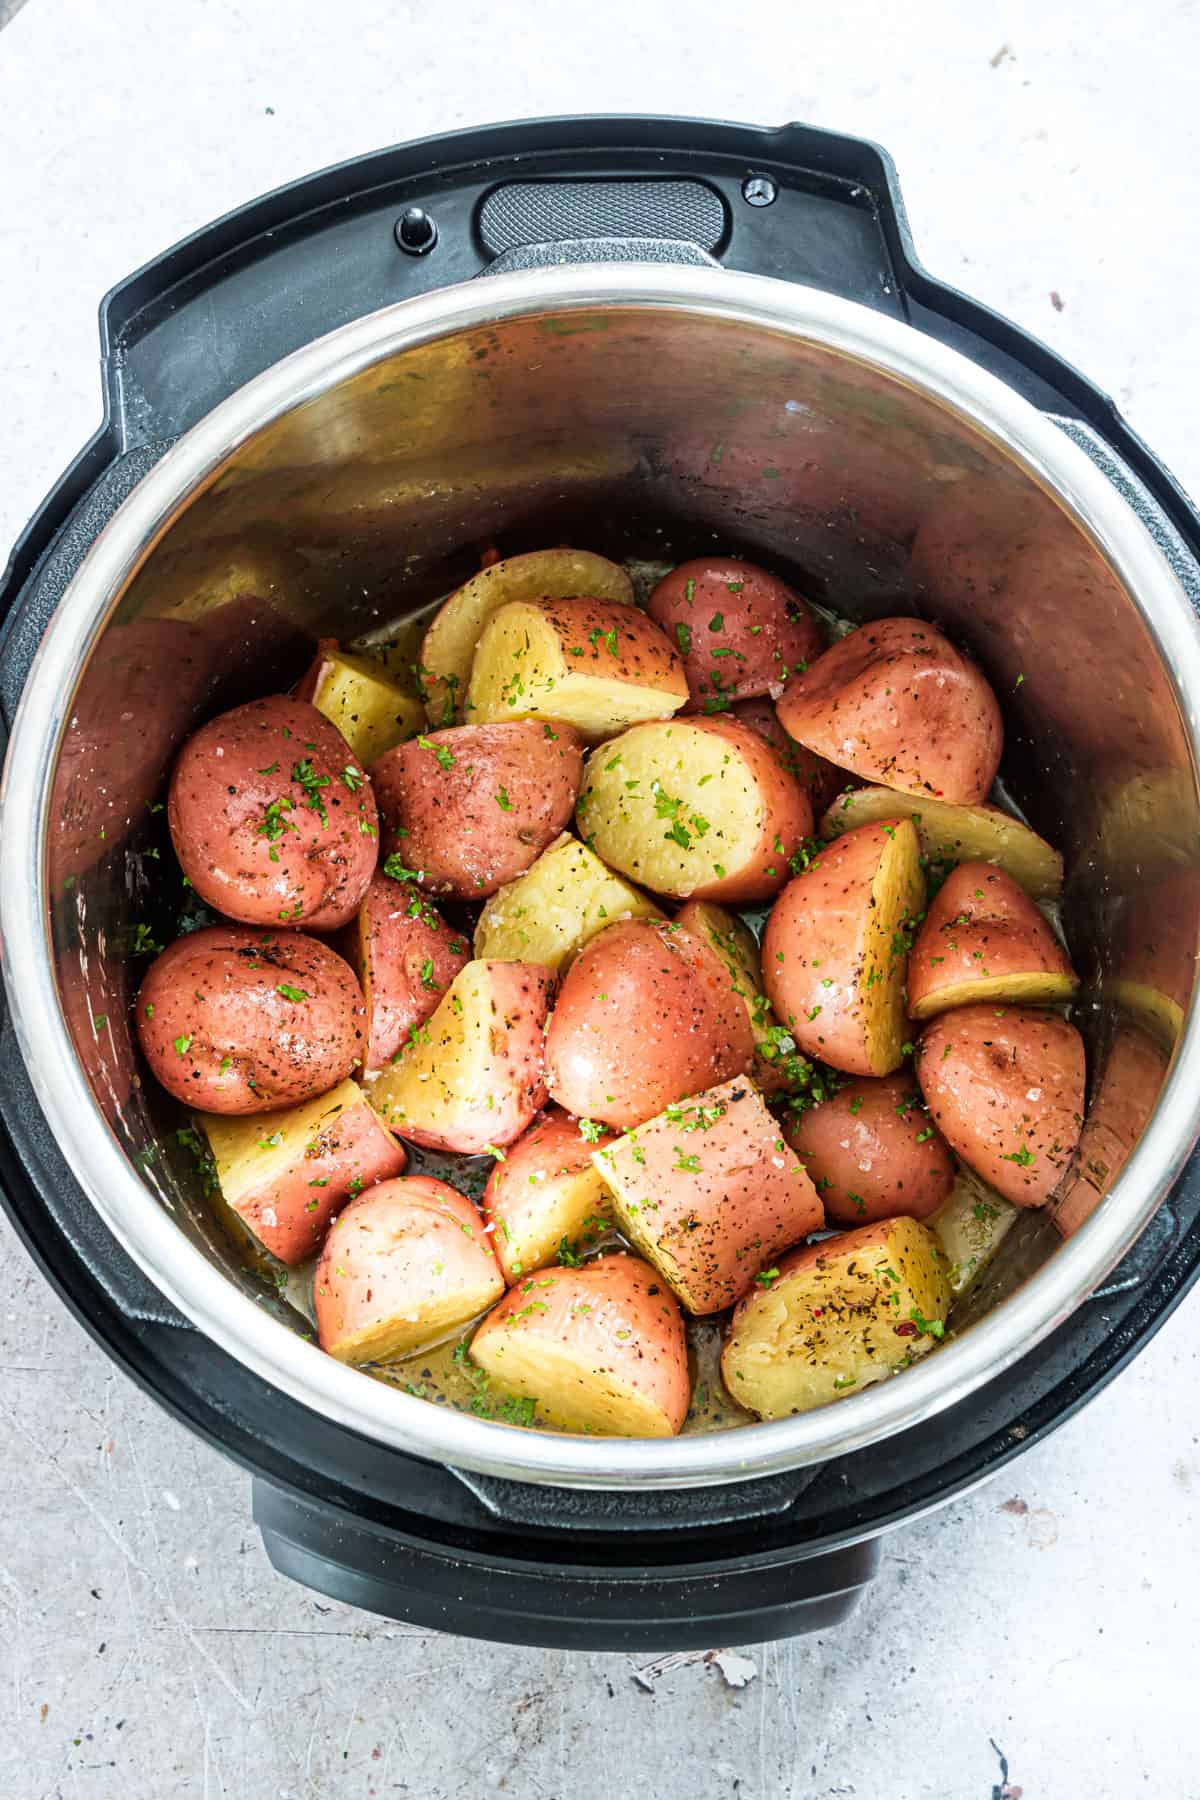 Top and bottom view of finished instant pot red potatoes inside a pressure cooker